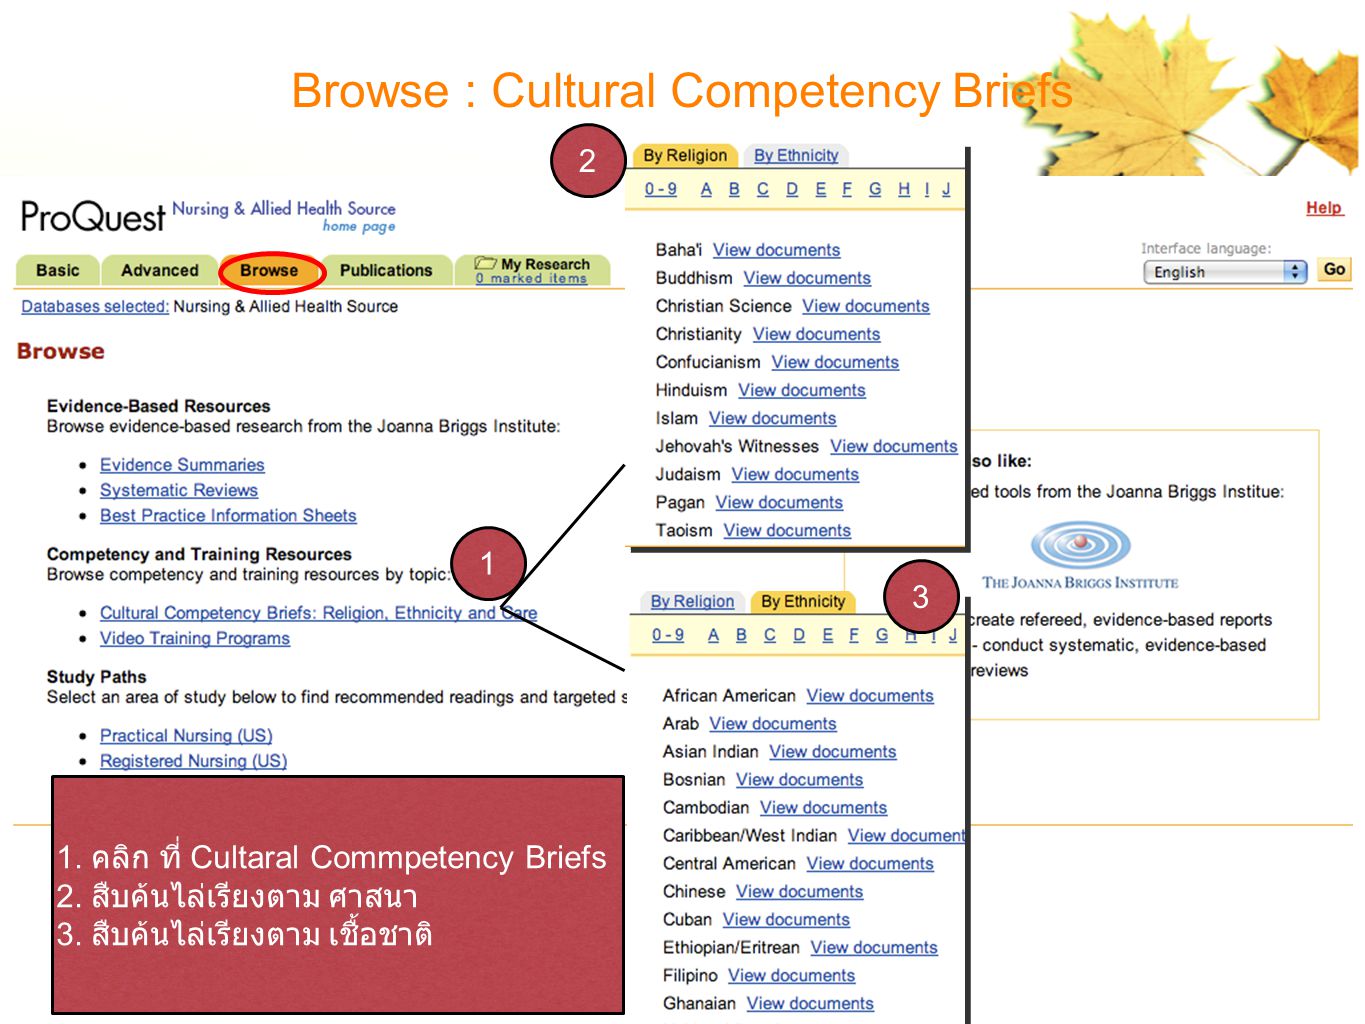 9 Browse : Cultural Competency Briefs คลิก ที่ Cultaral Commpetency Briefs 2.